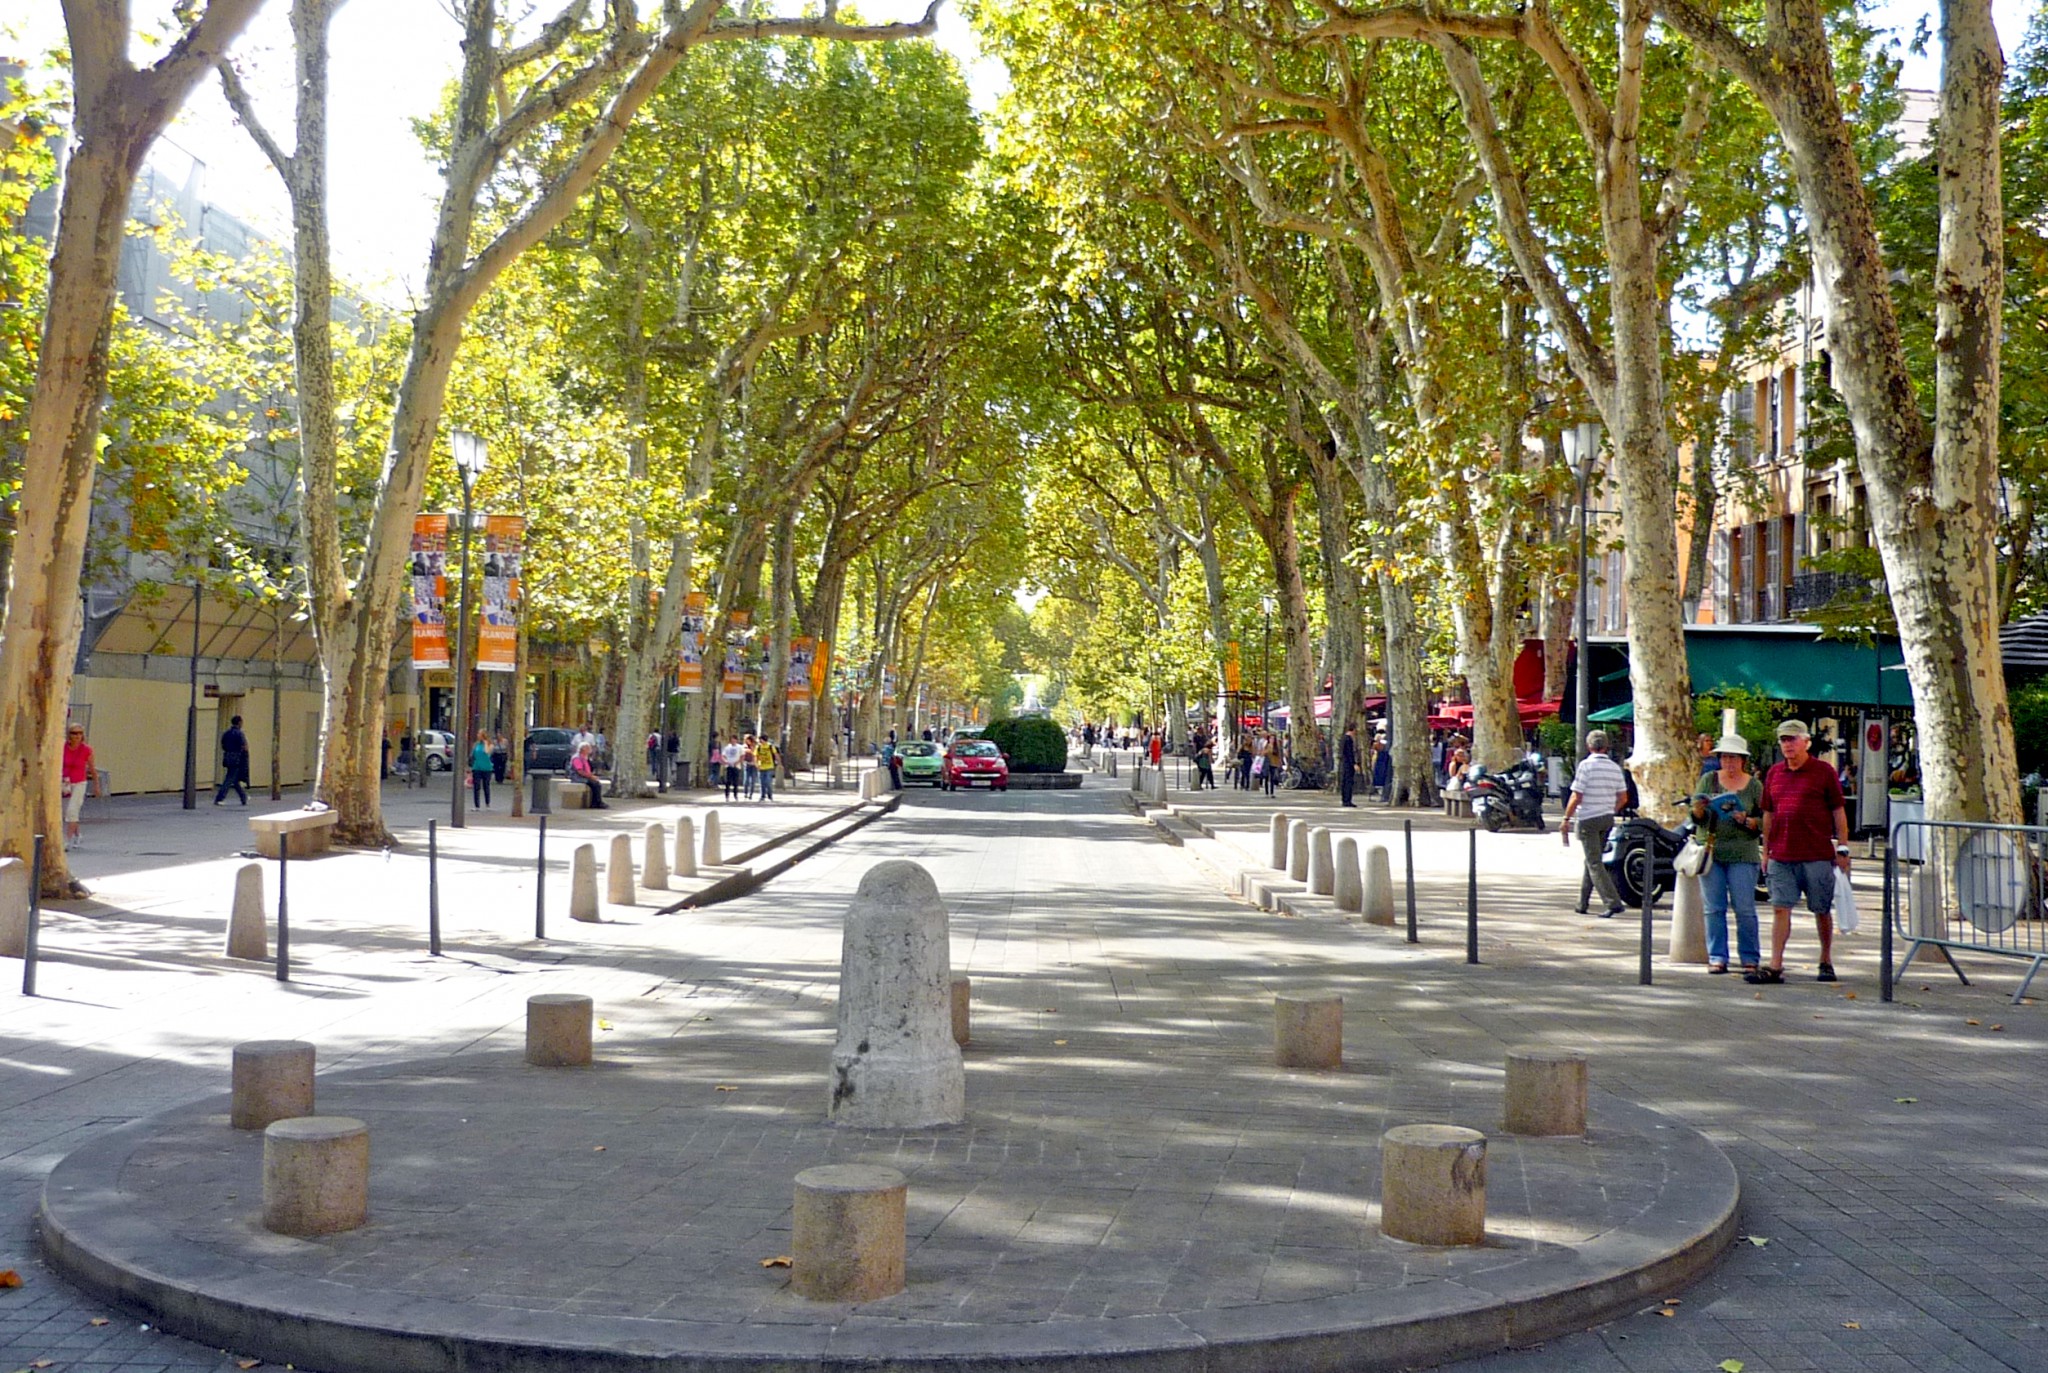 Cours Mirabeau Aix-en-Provence 02 © French Moments